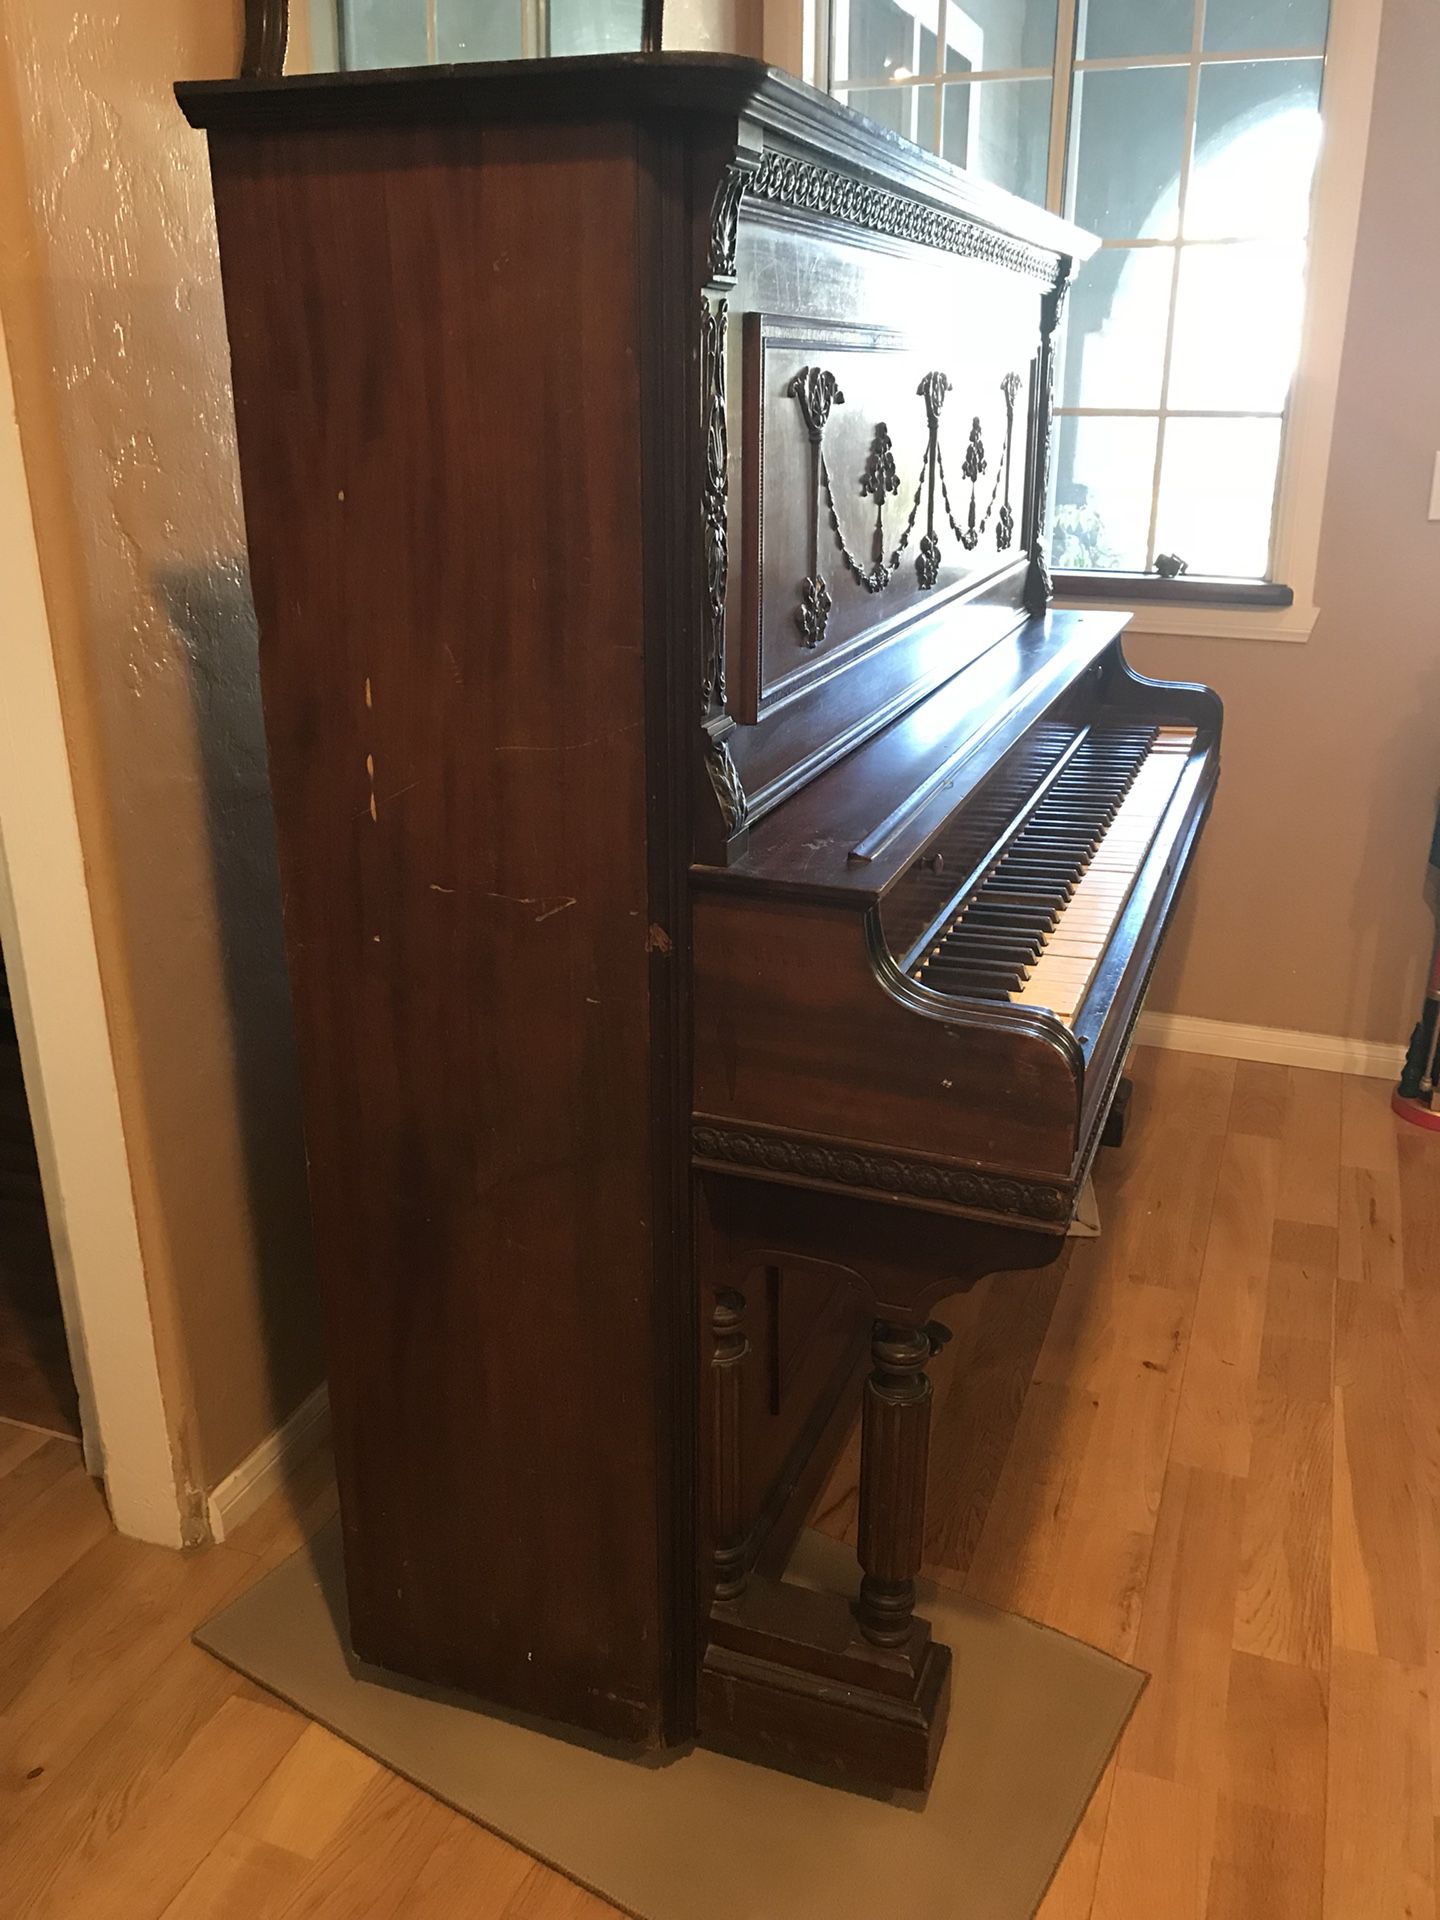 Vintage Louis Vuitton Piano Small for Sale in Bellflower, CA - OfferUp